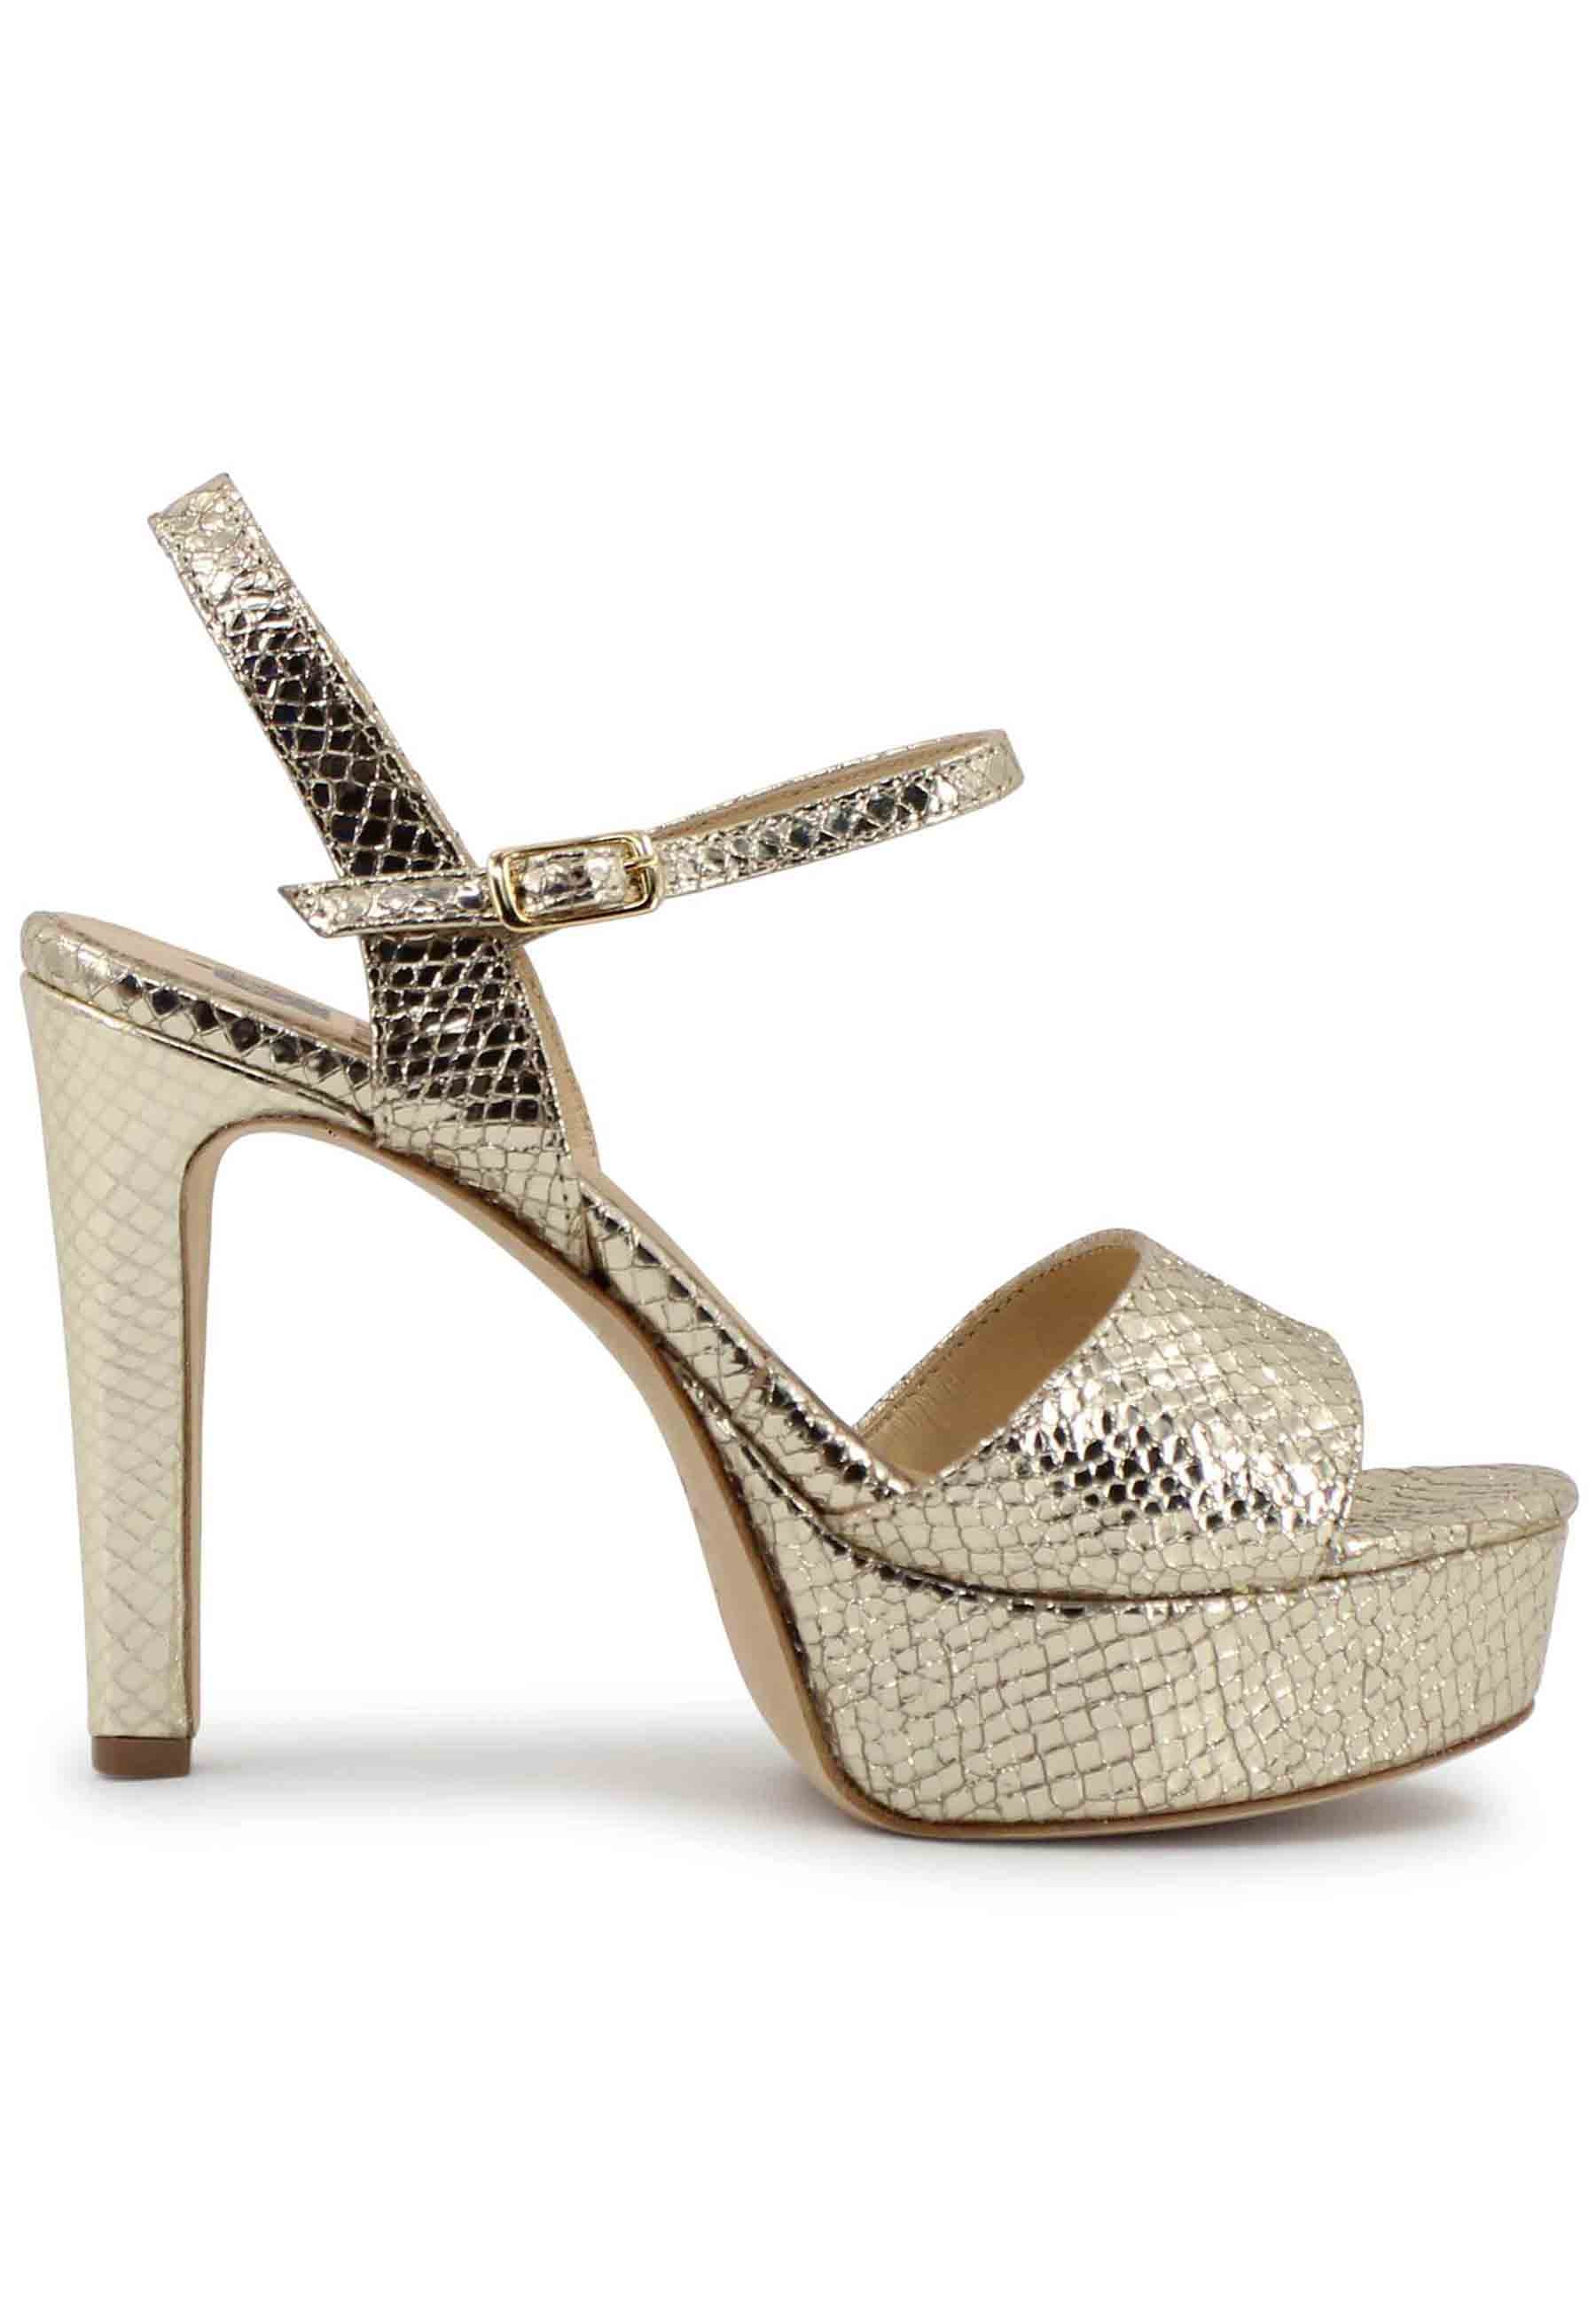 Women's sandals in platinum printed laminated leather with high heel and platform